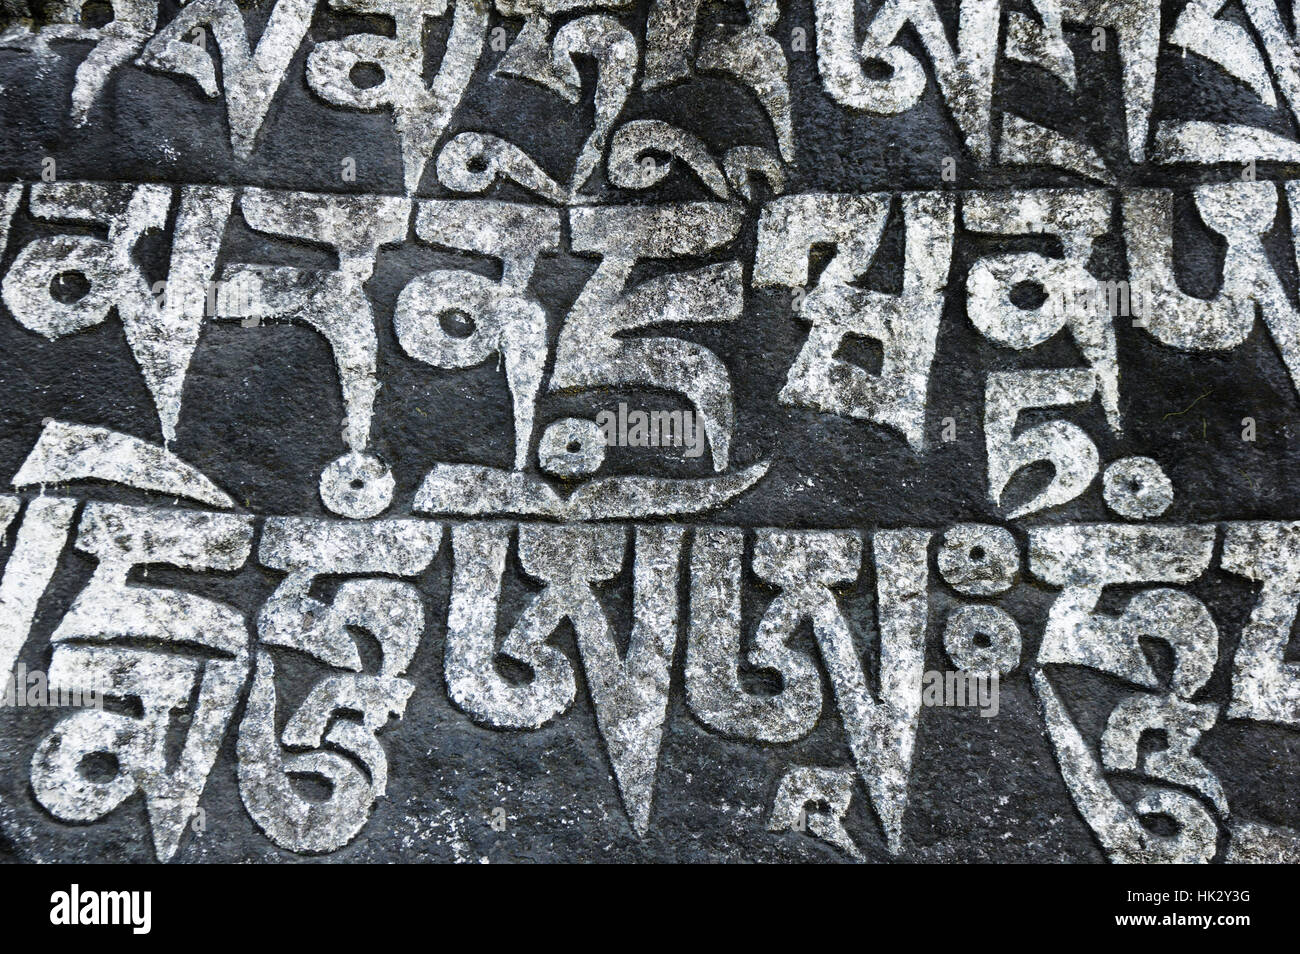 Mani stone carved with Tibetan script and painted white and black Stock Photo